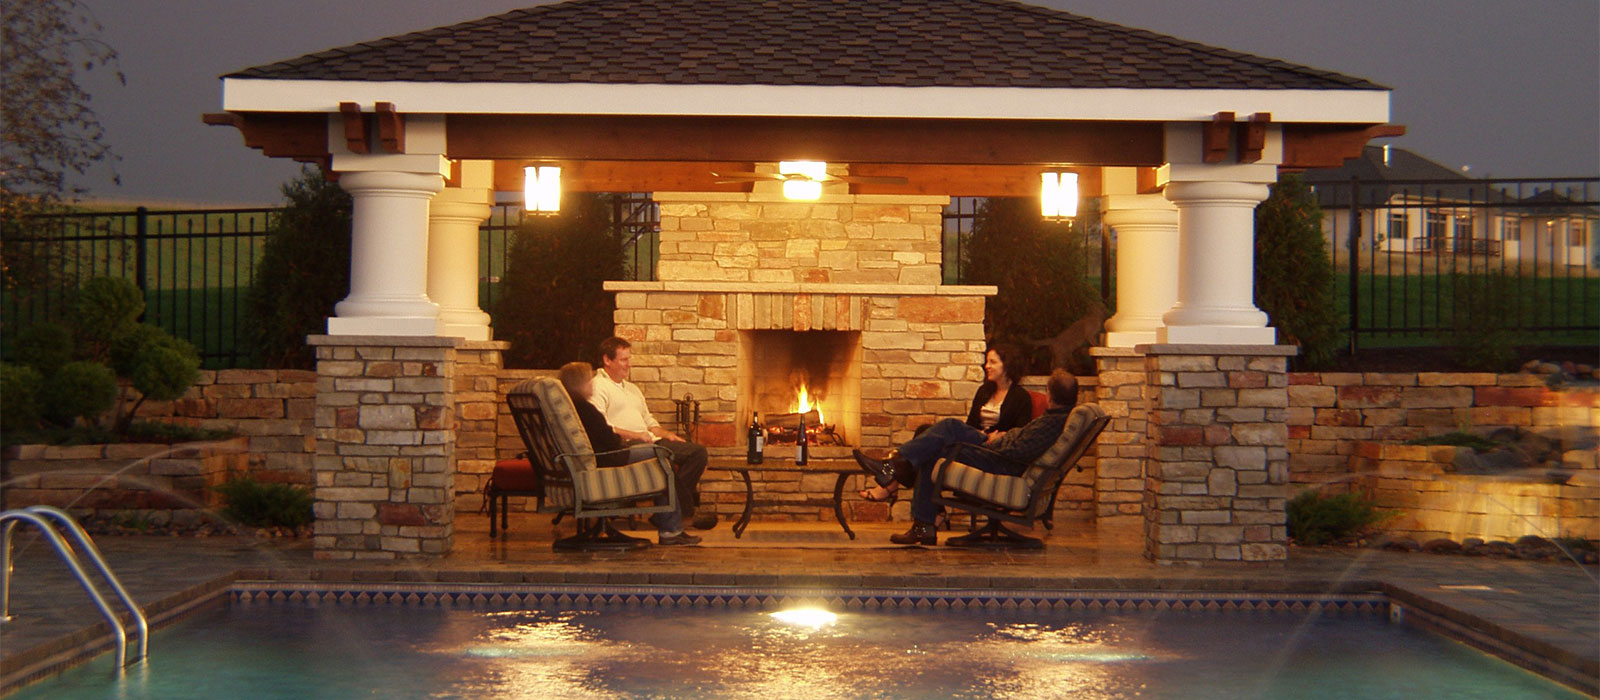 Covered Outdoor Living Room With Statement Fireplace in the Twin Cities